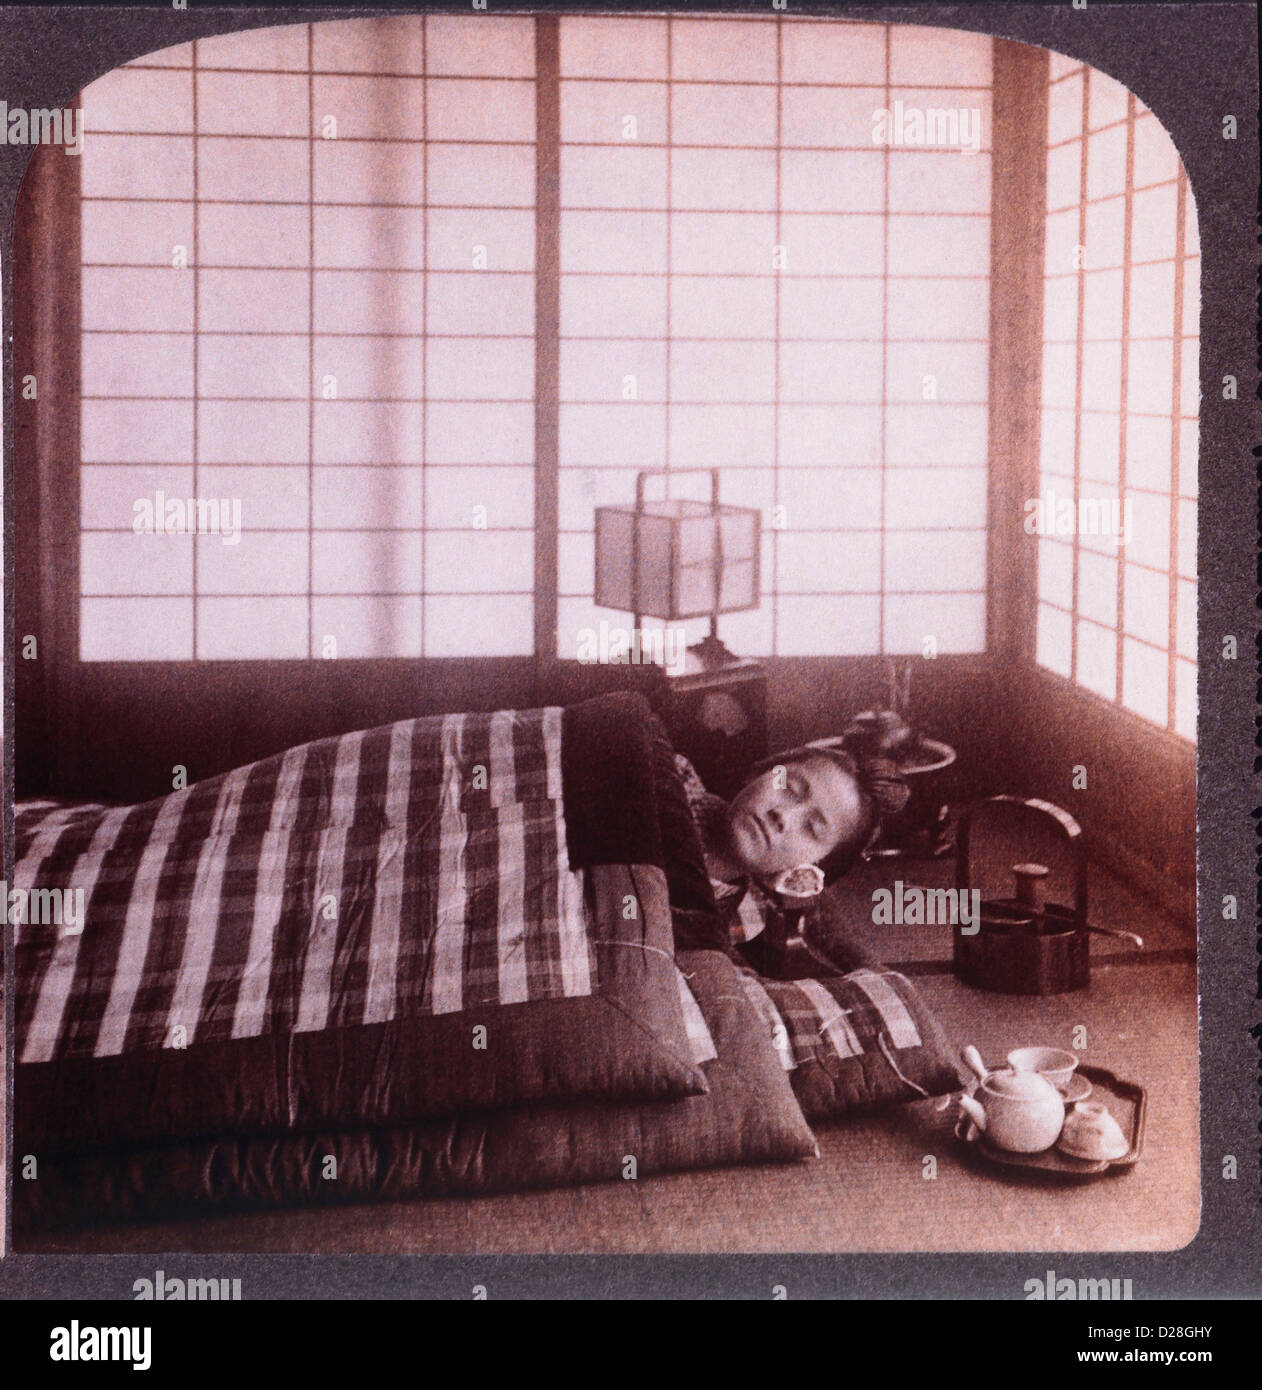 Young Woman Sleeping Between Futons, Stereo Photograph, 1904 Stock Photo